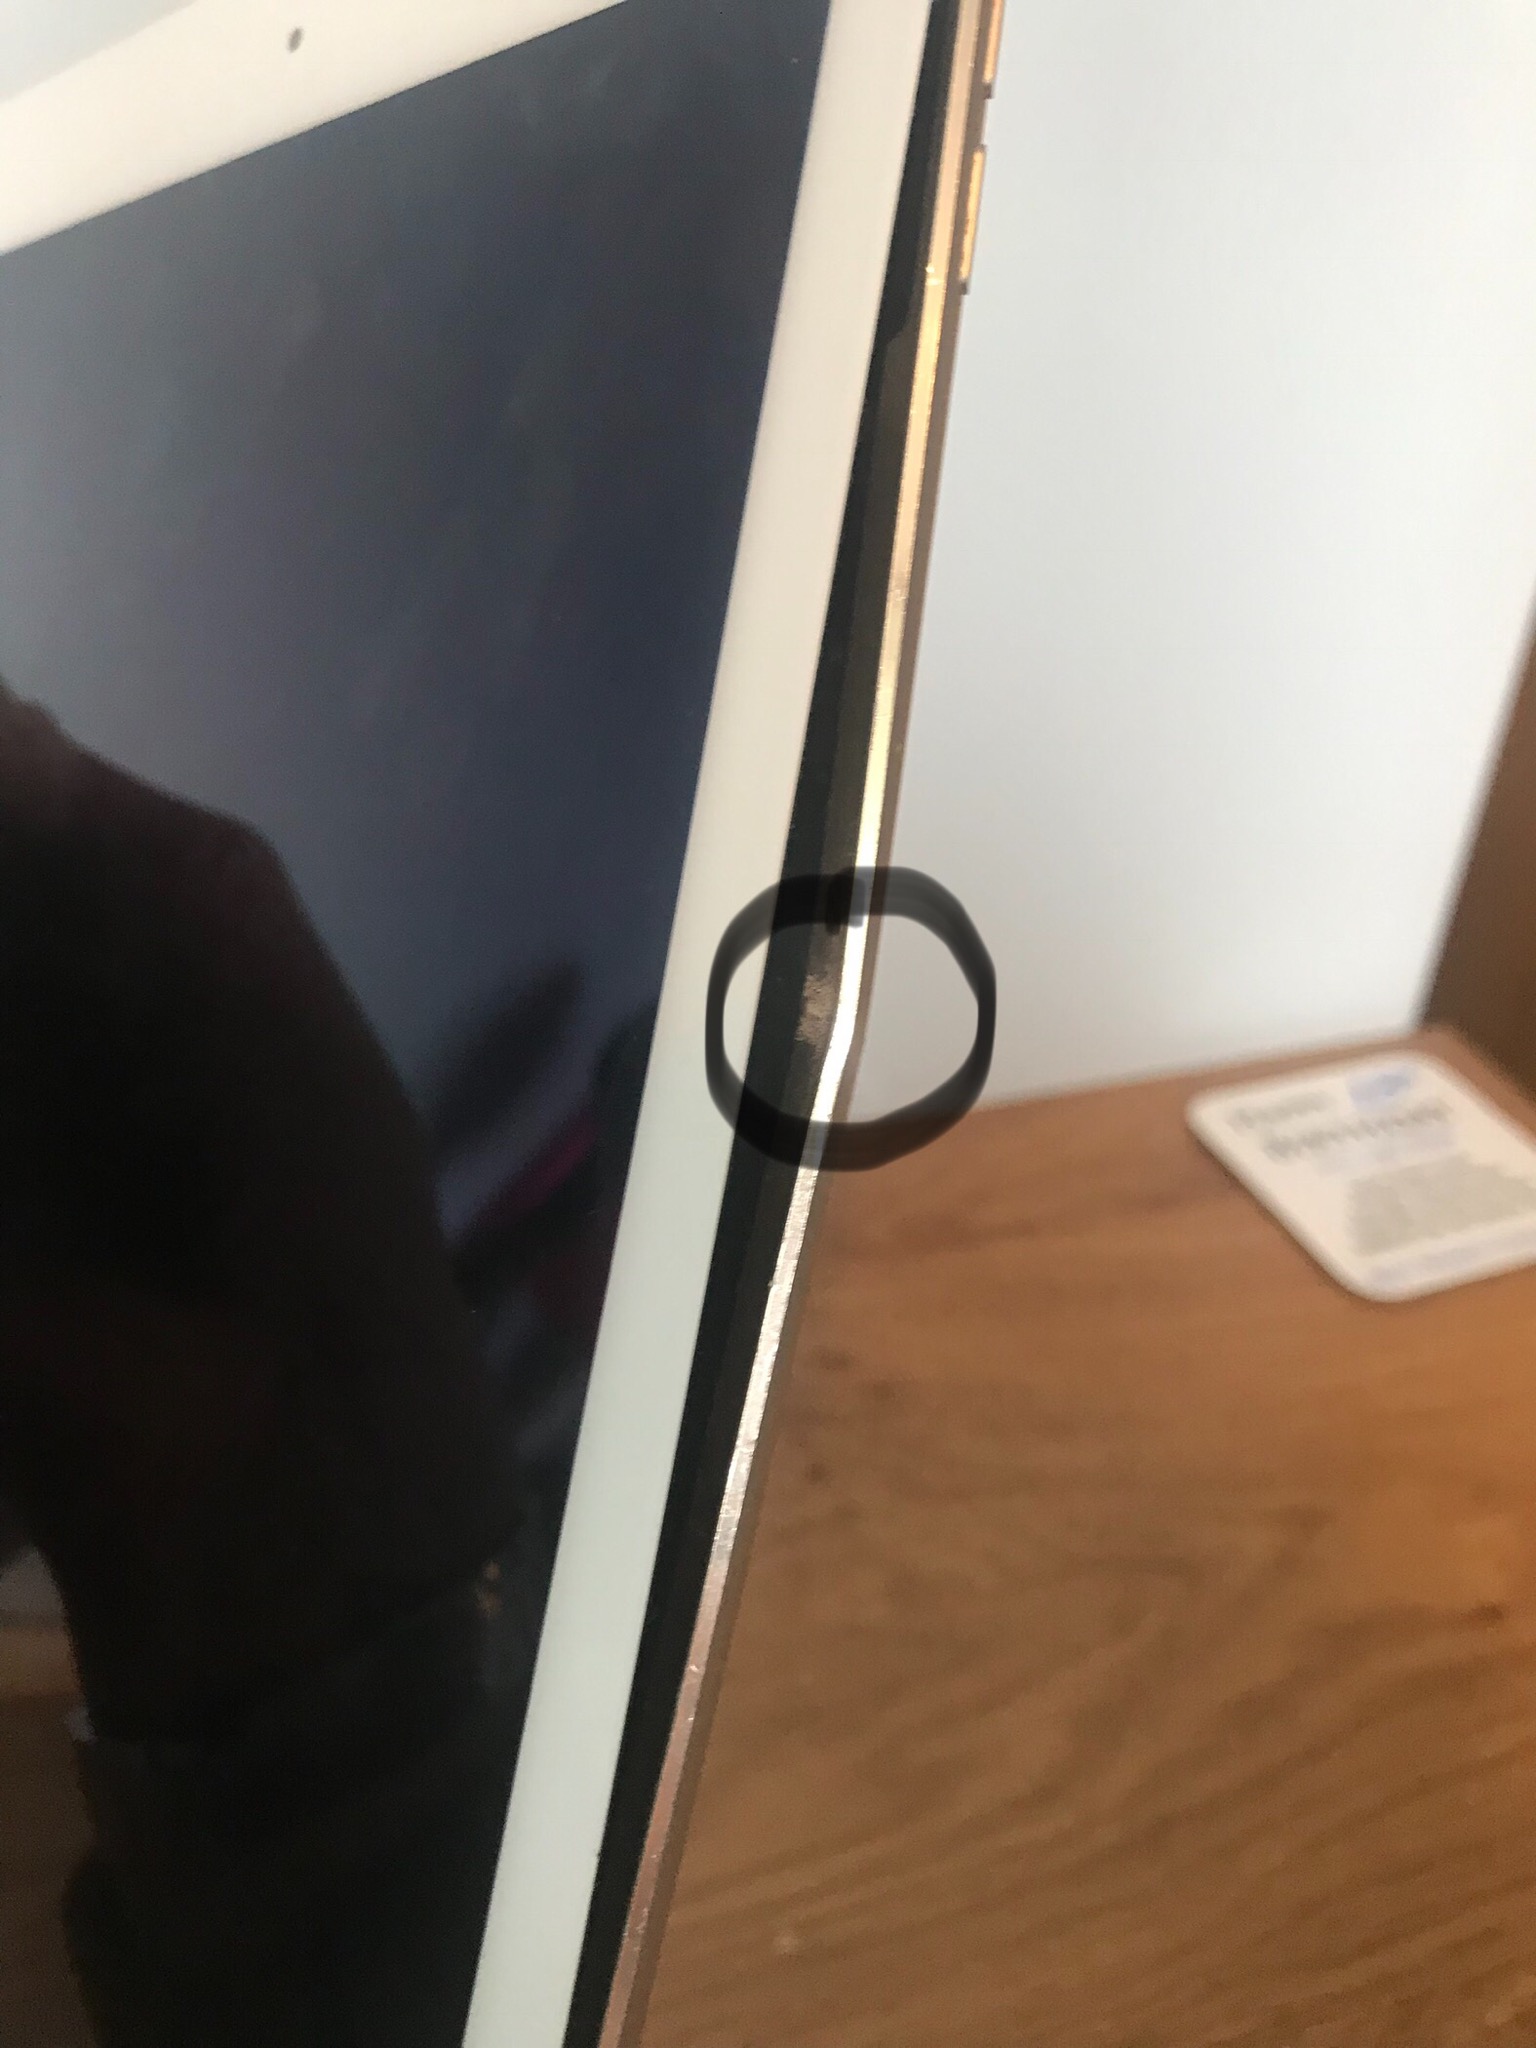 Ipad Bent And Screen Popped Out On Its Own Apple Community